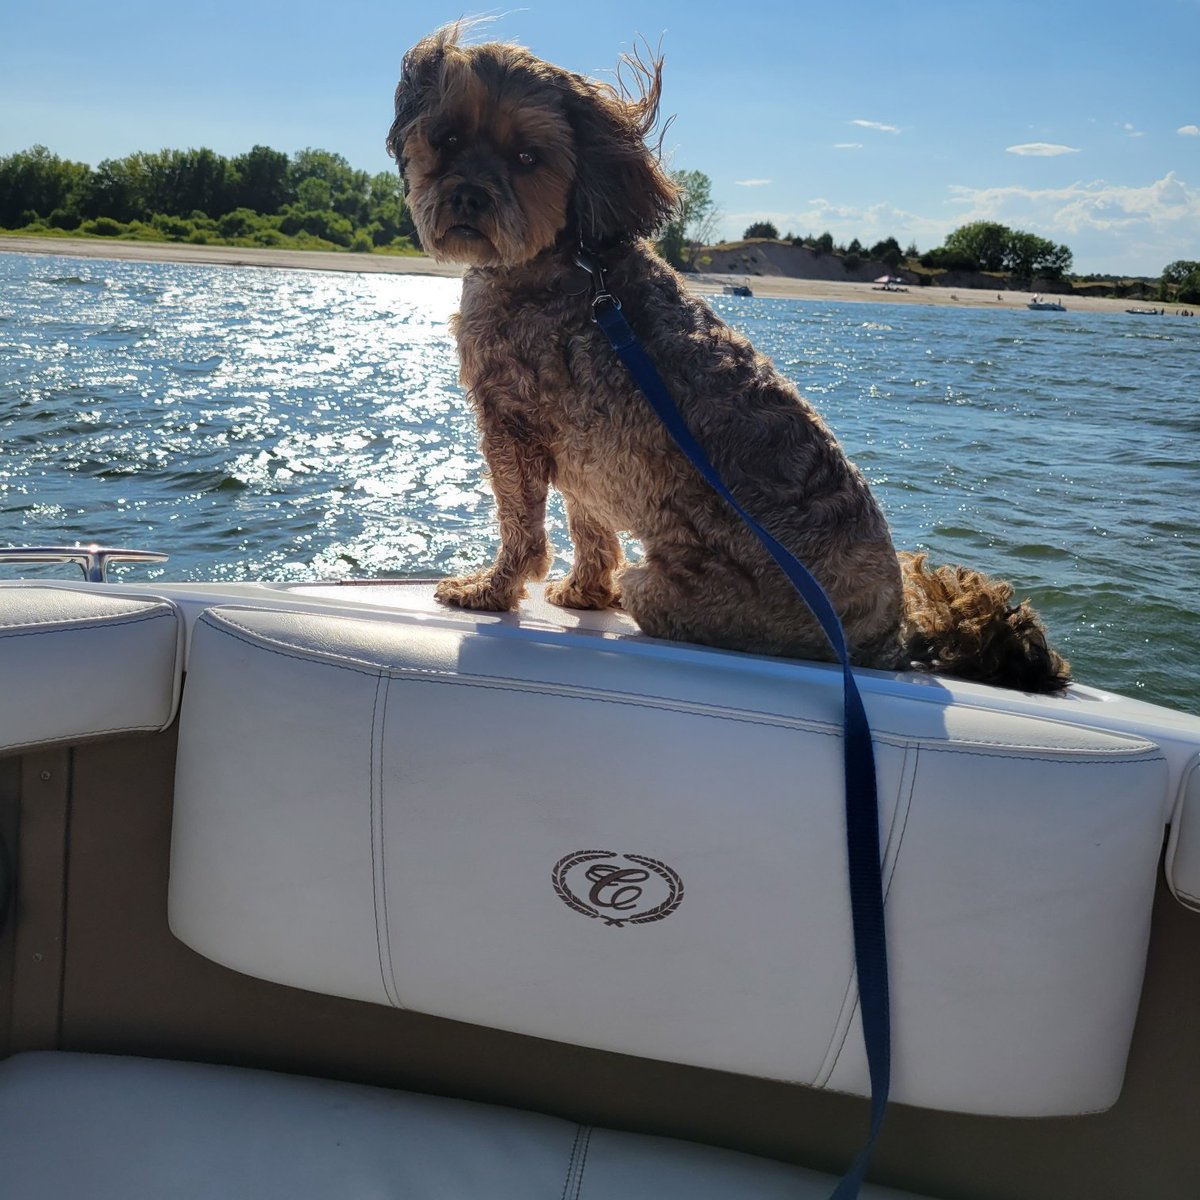 Enjoying labor day weekend on a  @CobaltBoats.